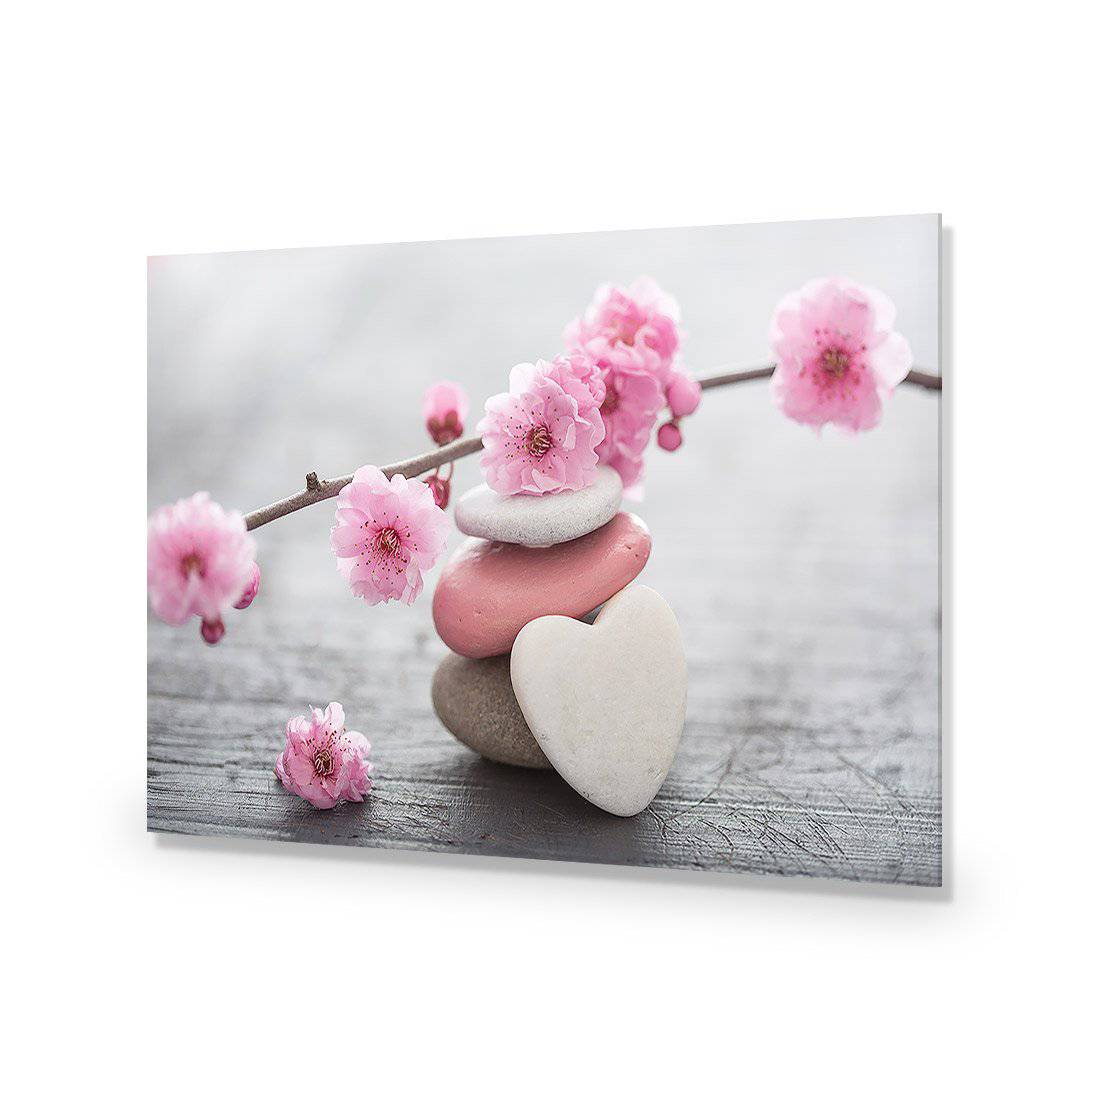 Blossom Stones-Acrylic-Wall Art Design-Without Border-Acrylic - No Frame-45x30cm-Wall Art Designs